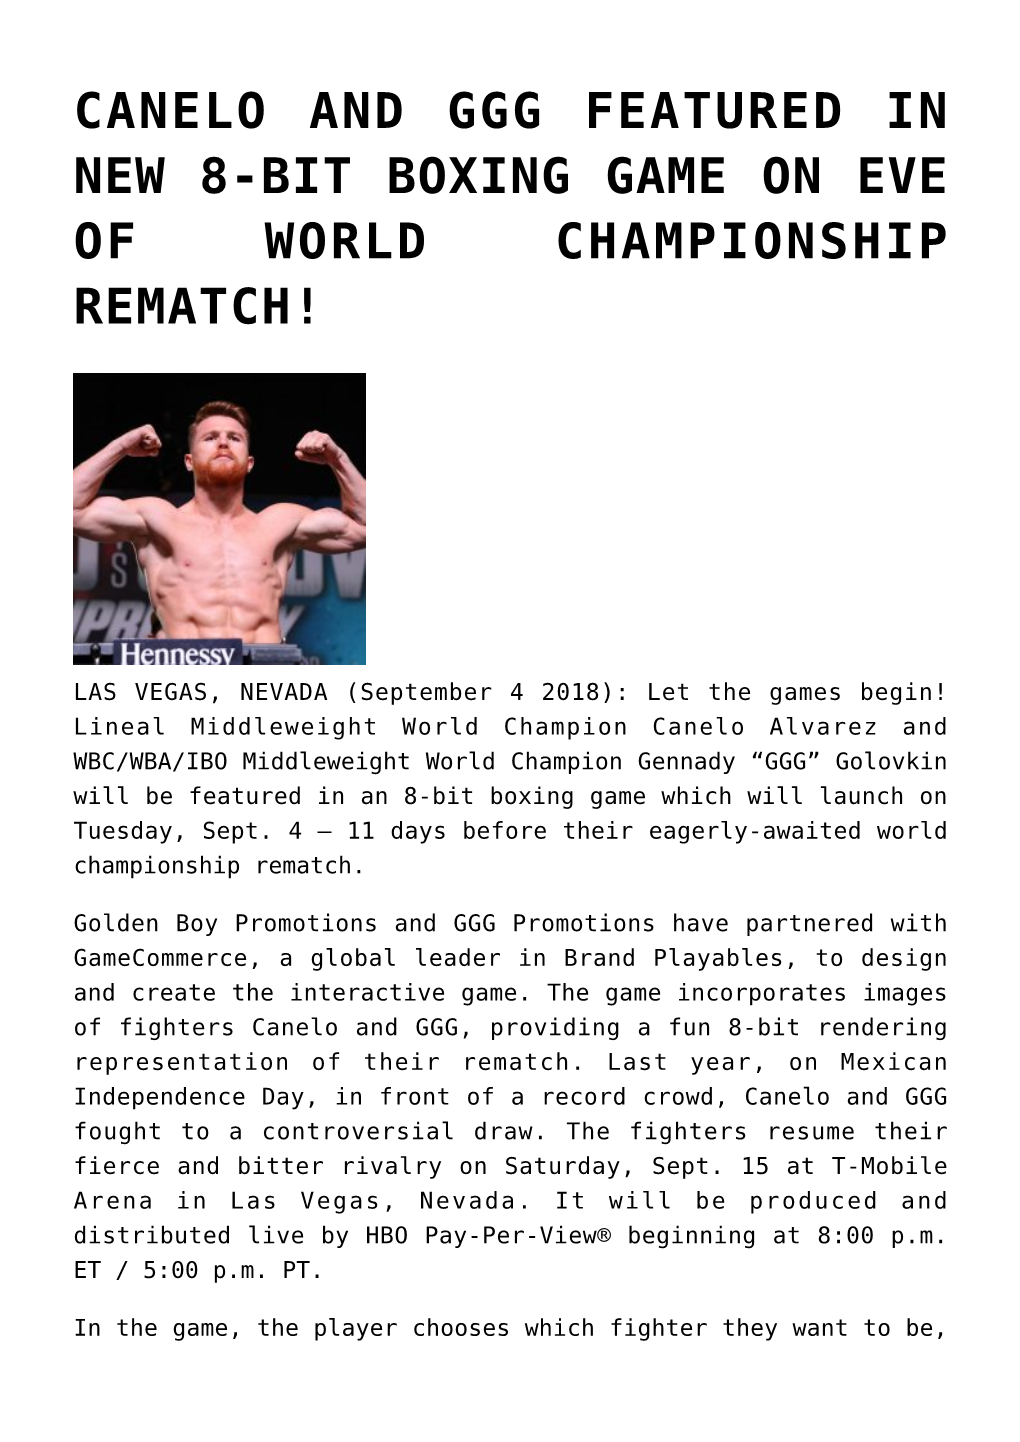 Canelo and Ggg Featured in New 8-Bit Boxing Game on Eve of World Championship Rematch!